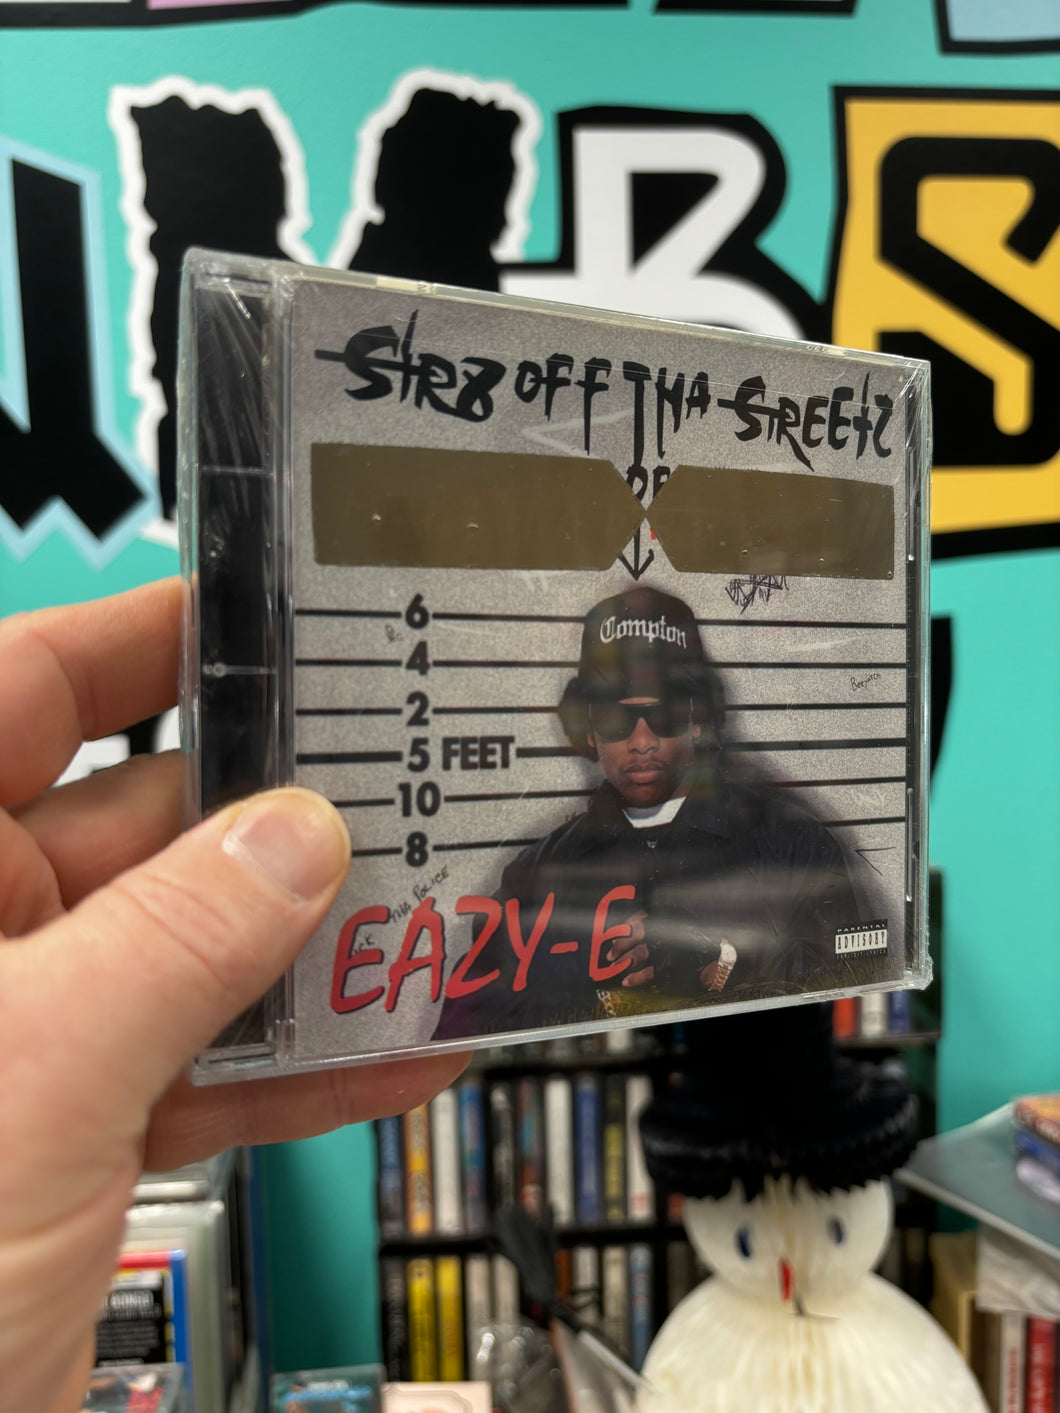 Eazy-E: Str8 Off Tha Streetz Of Muthaphukkin Compton, CD, reissue, US 1998